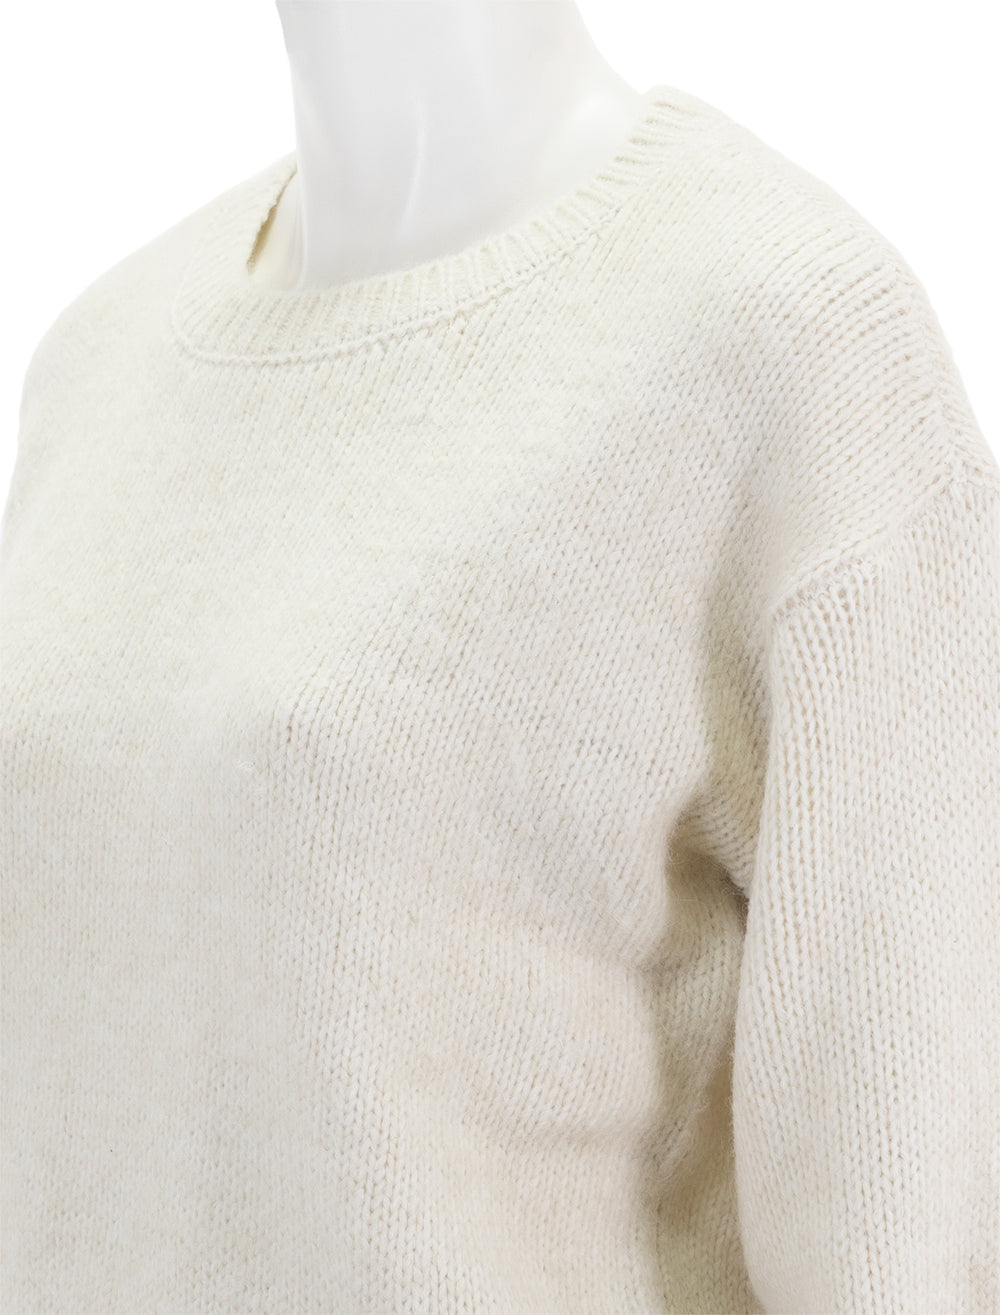 Close-up view of Steve Madden's colette sweater in whisper white.